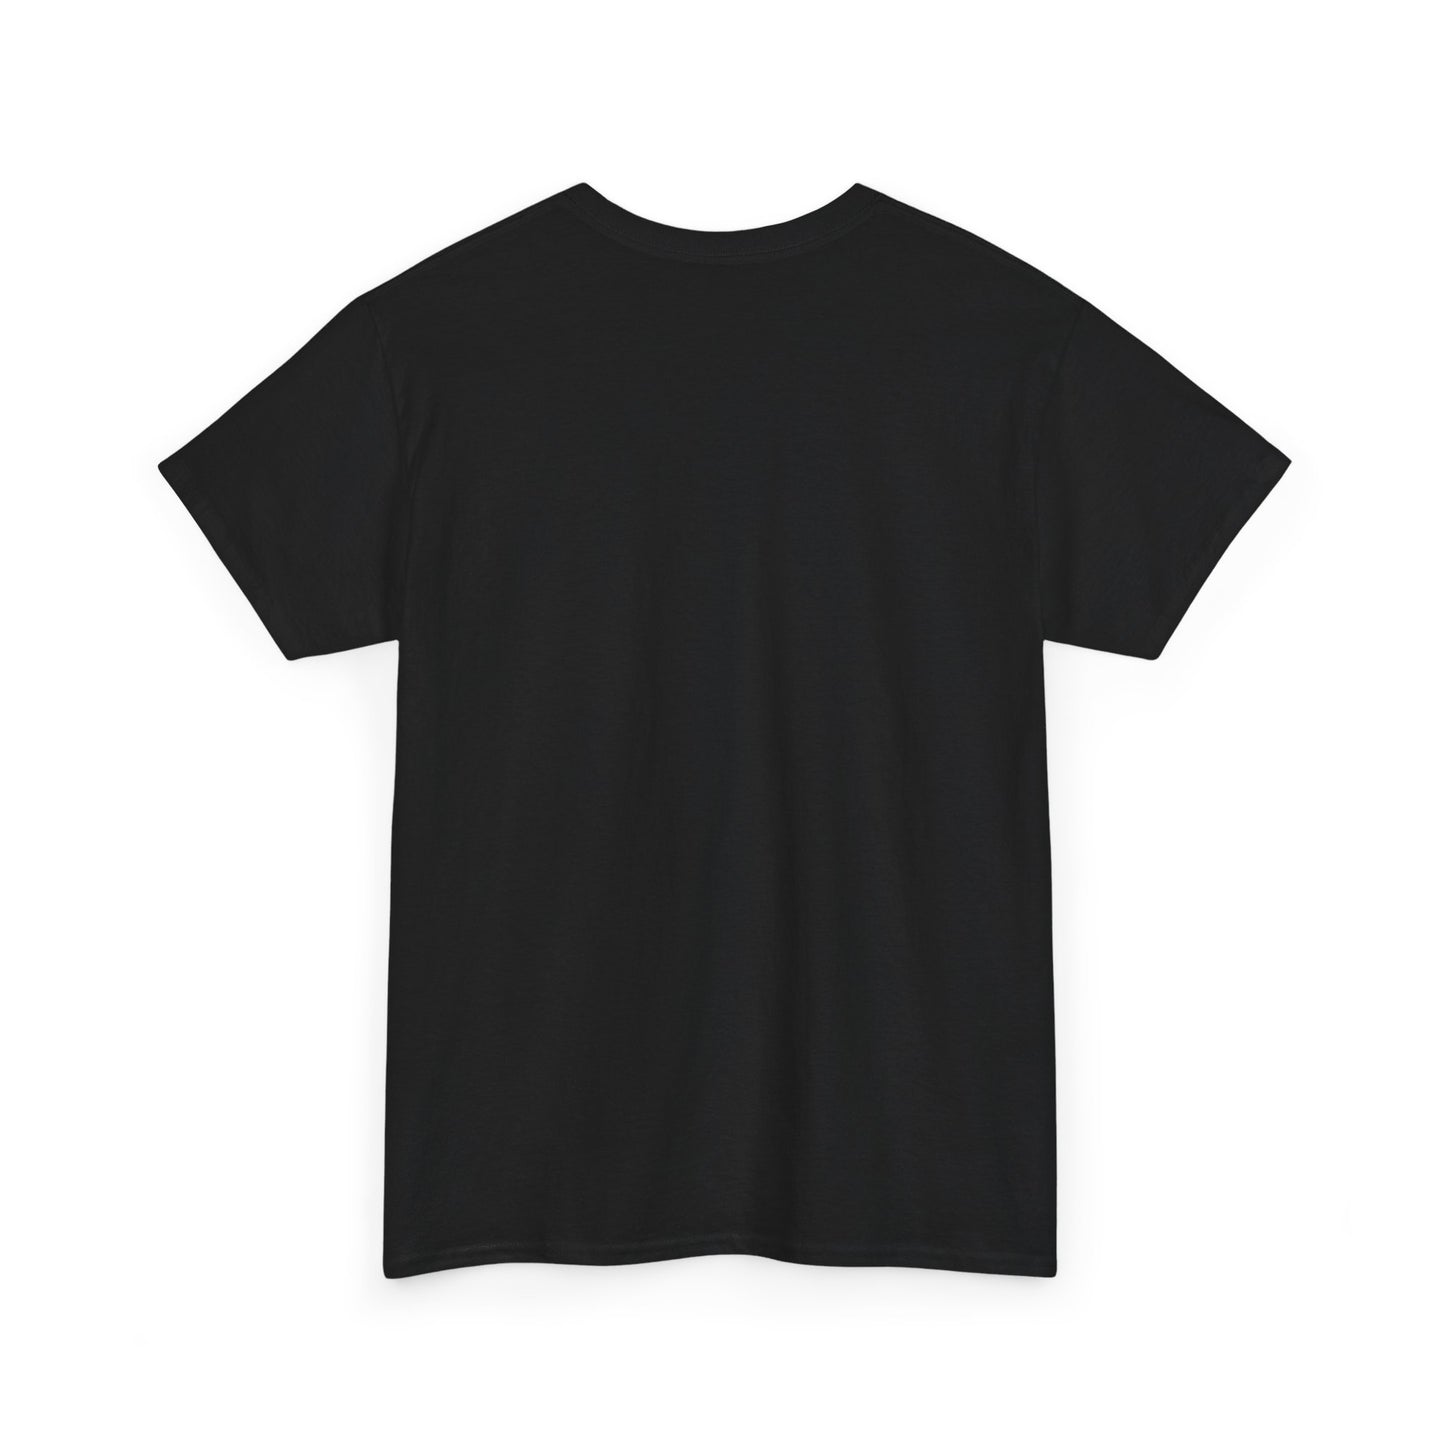 Hassir Childs Heavy Cotton Tee